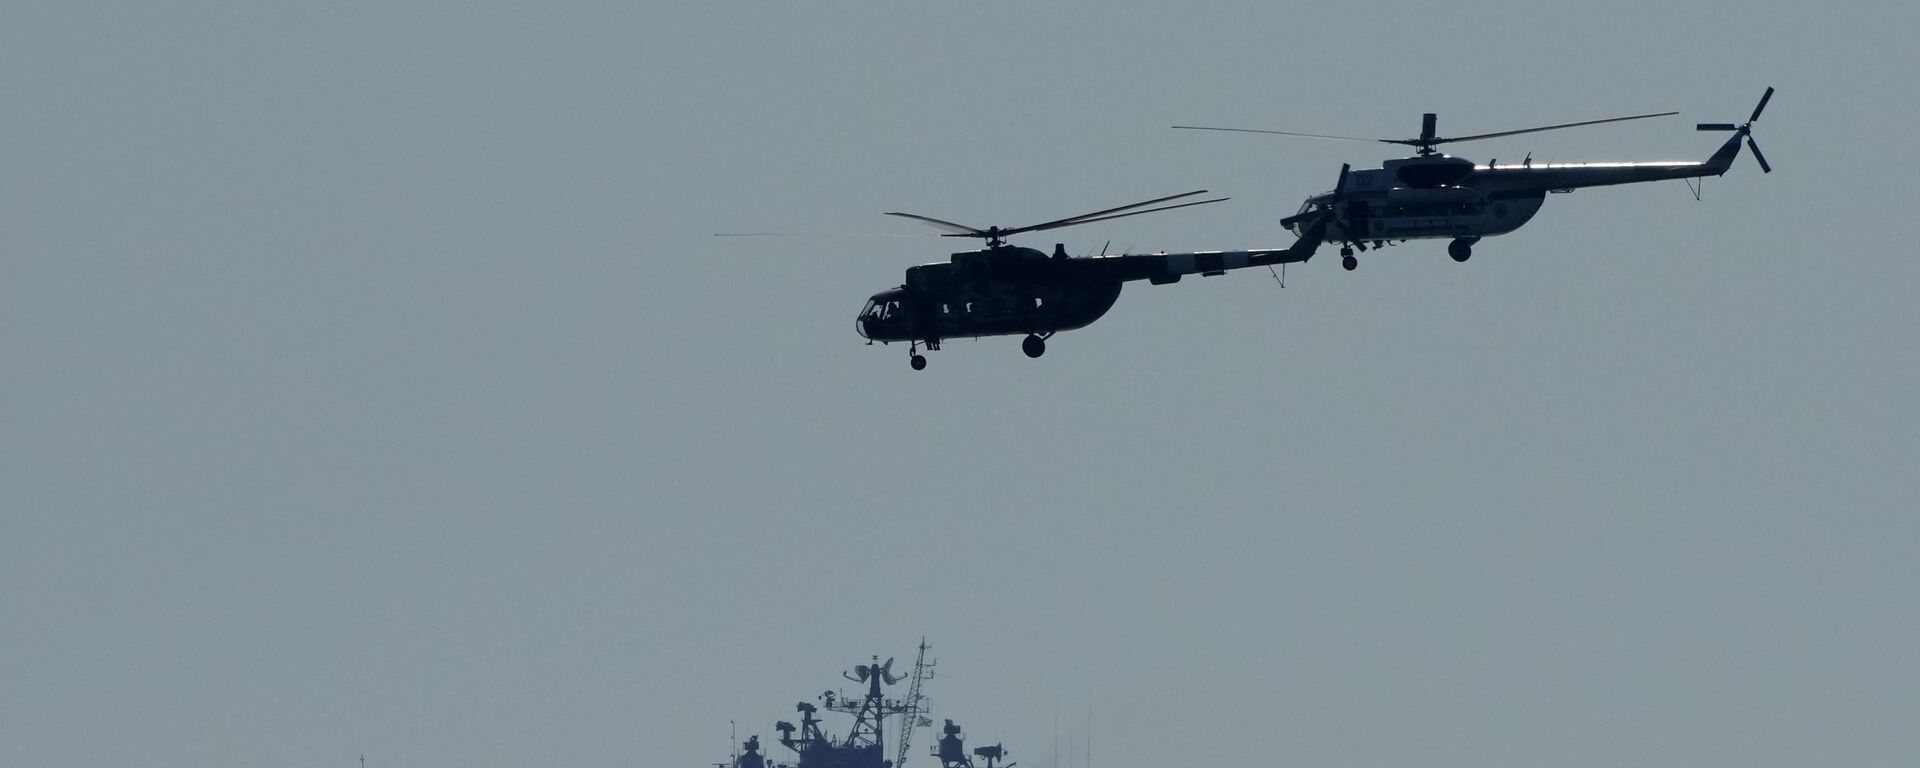 Ukrainian helicopters fly over a Russian warship  during Sea Breeze 2021 maneuvers, in the Black Sea, Friday, July 9, 2021 - Sputnik International, 1920, 28.02.2022